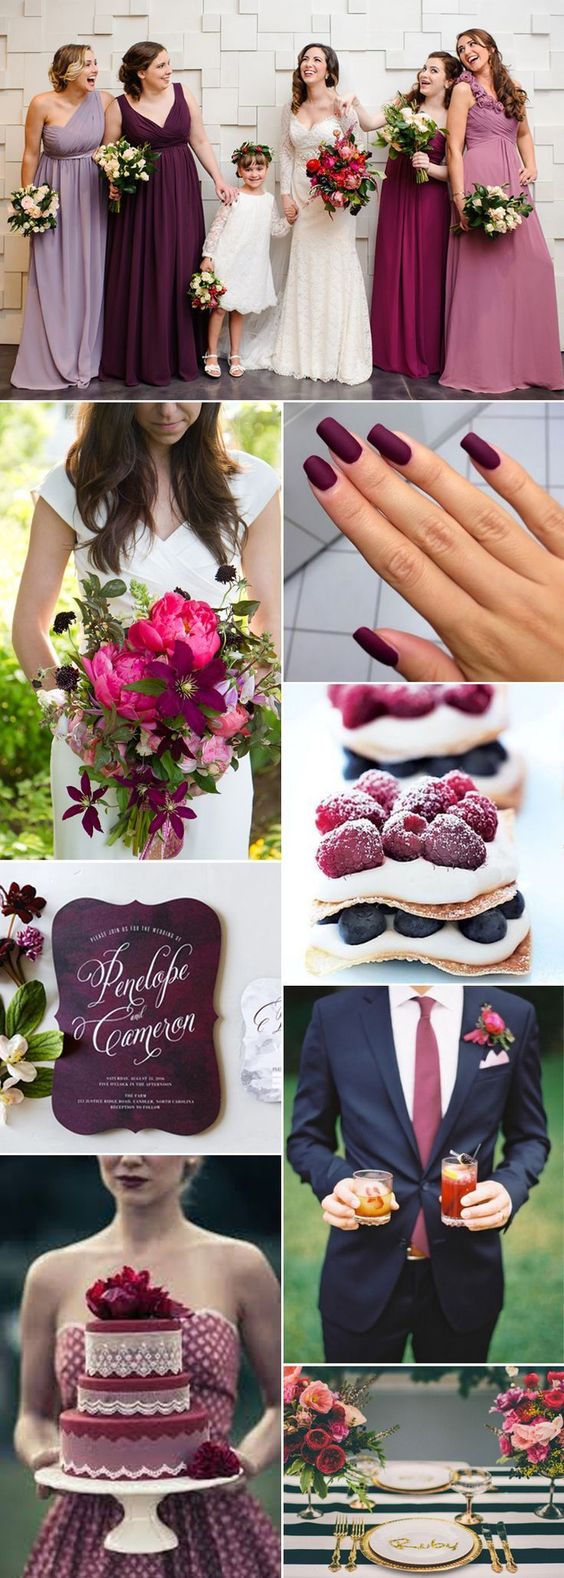 smitten 2 Trend Forecasting: Top 15 Expected Wedding Color Ideas - 33